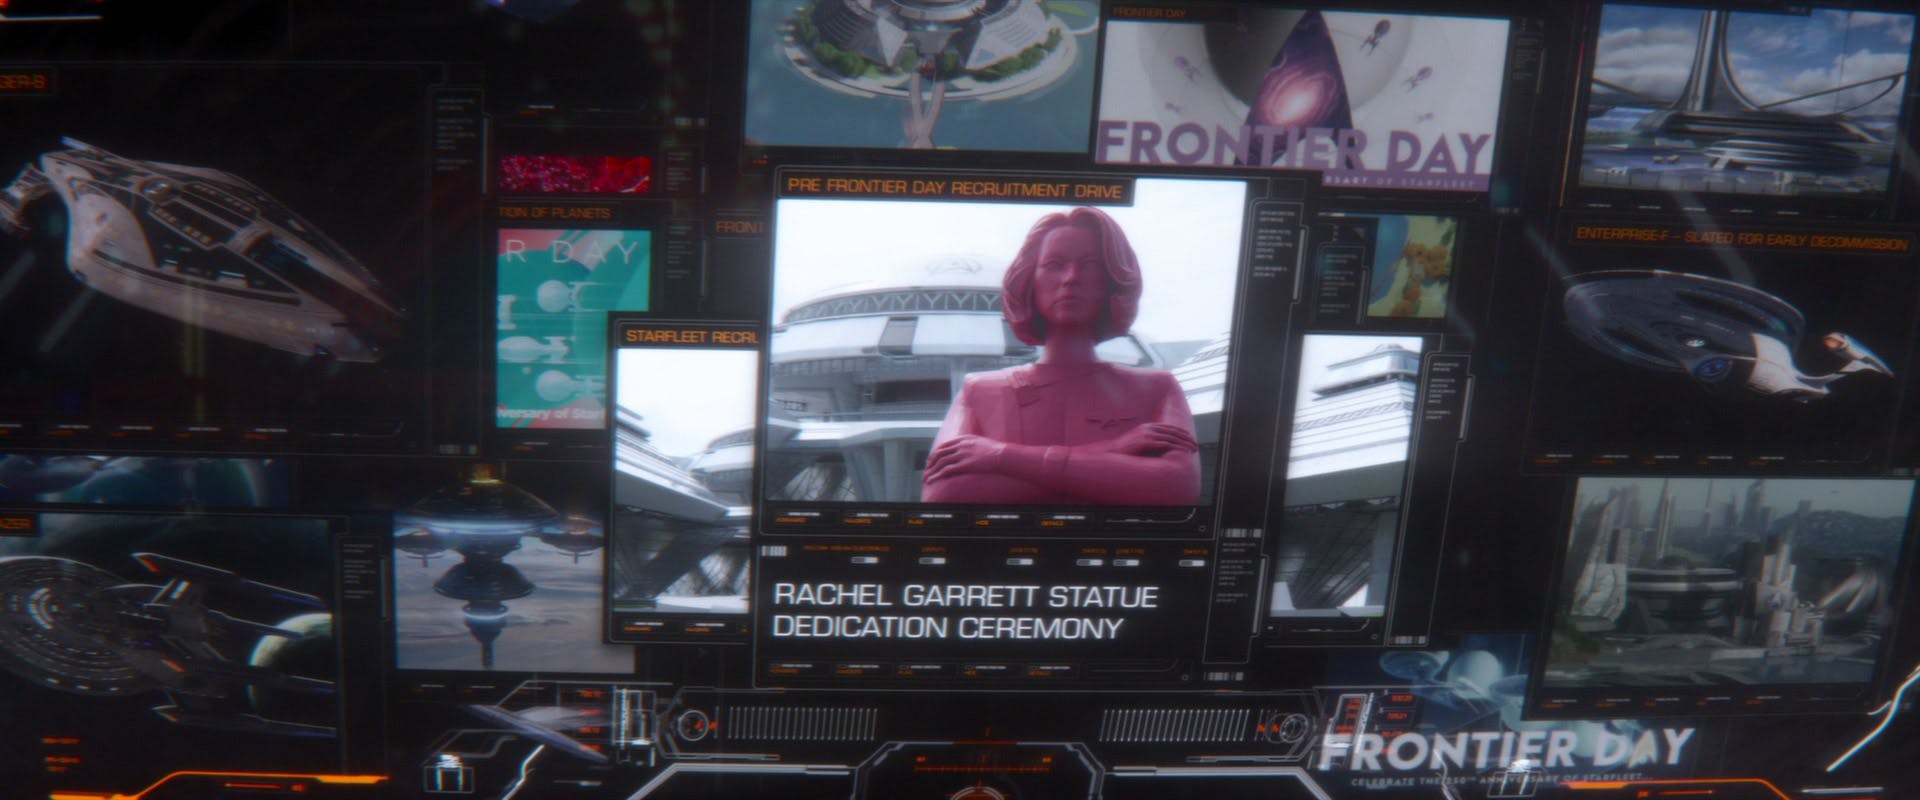 Aboard La Sirena, Raffi Musiker follows the lead of the Red Lady and finds the statue of a Rachel Garrett at its dedication ceremony at Starfleet's Recruitment campus in 'The Next Generation'